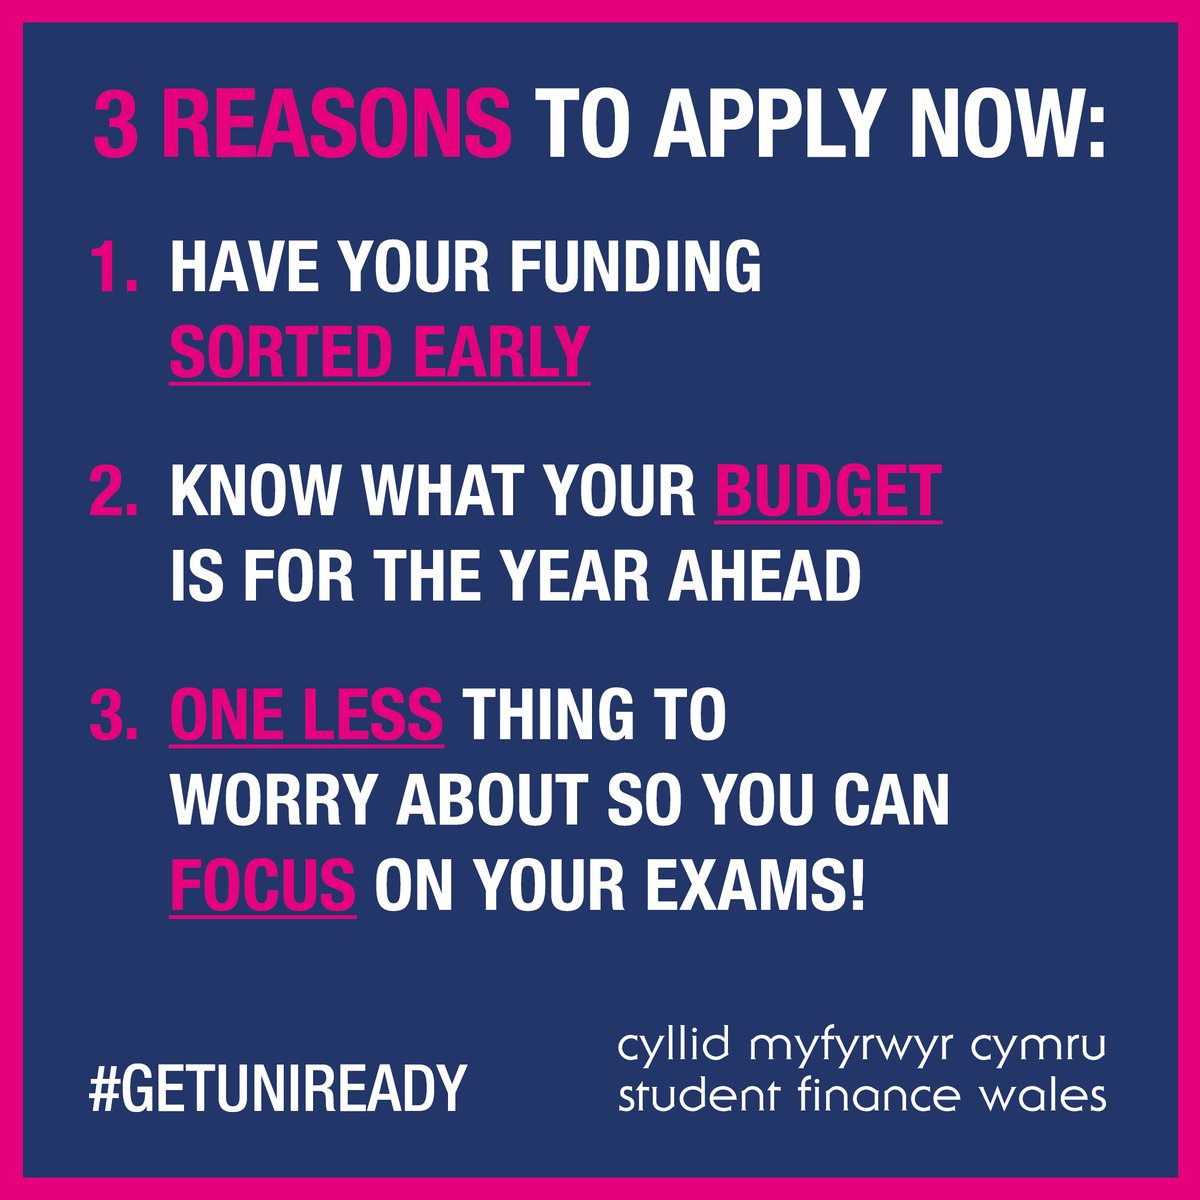 If you apply now, you can start seeing the benefits!

#GetUniReady and have your funding sorted so you can budget before you go to uni!

Find out how to apply: studentfinancewales.co.uk/discover-stude…